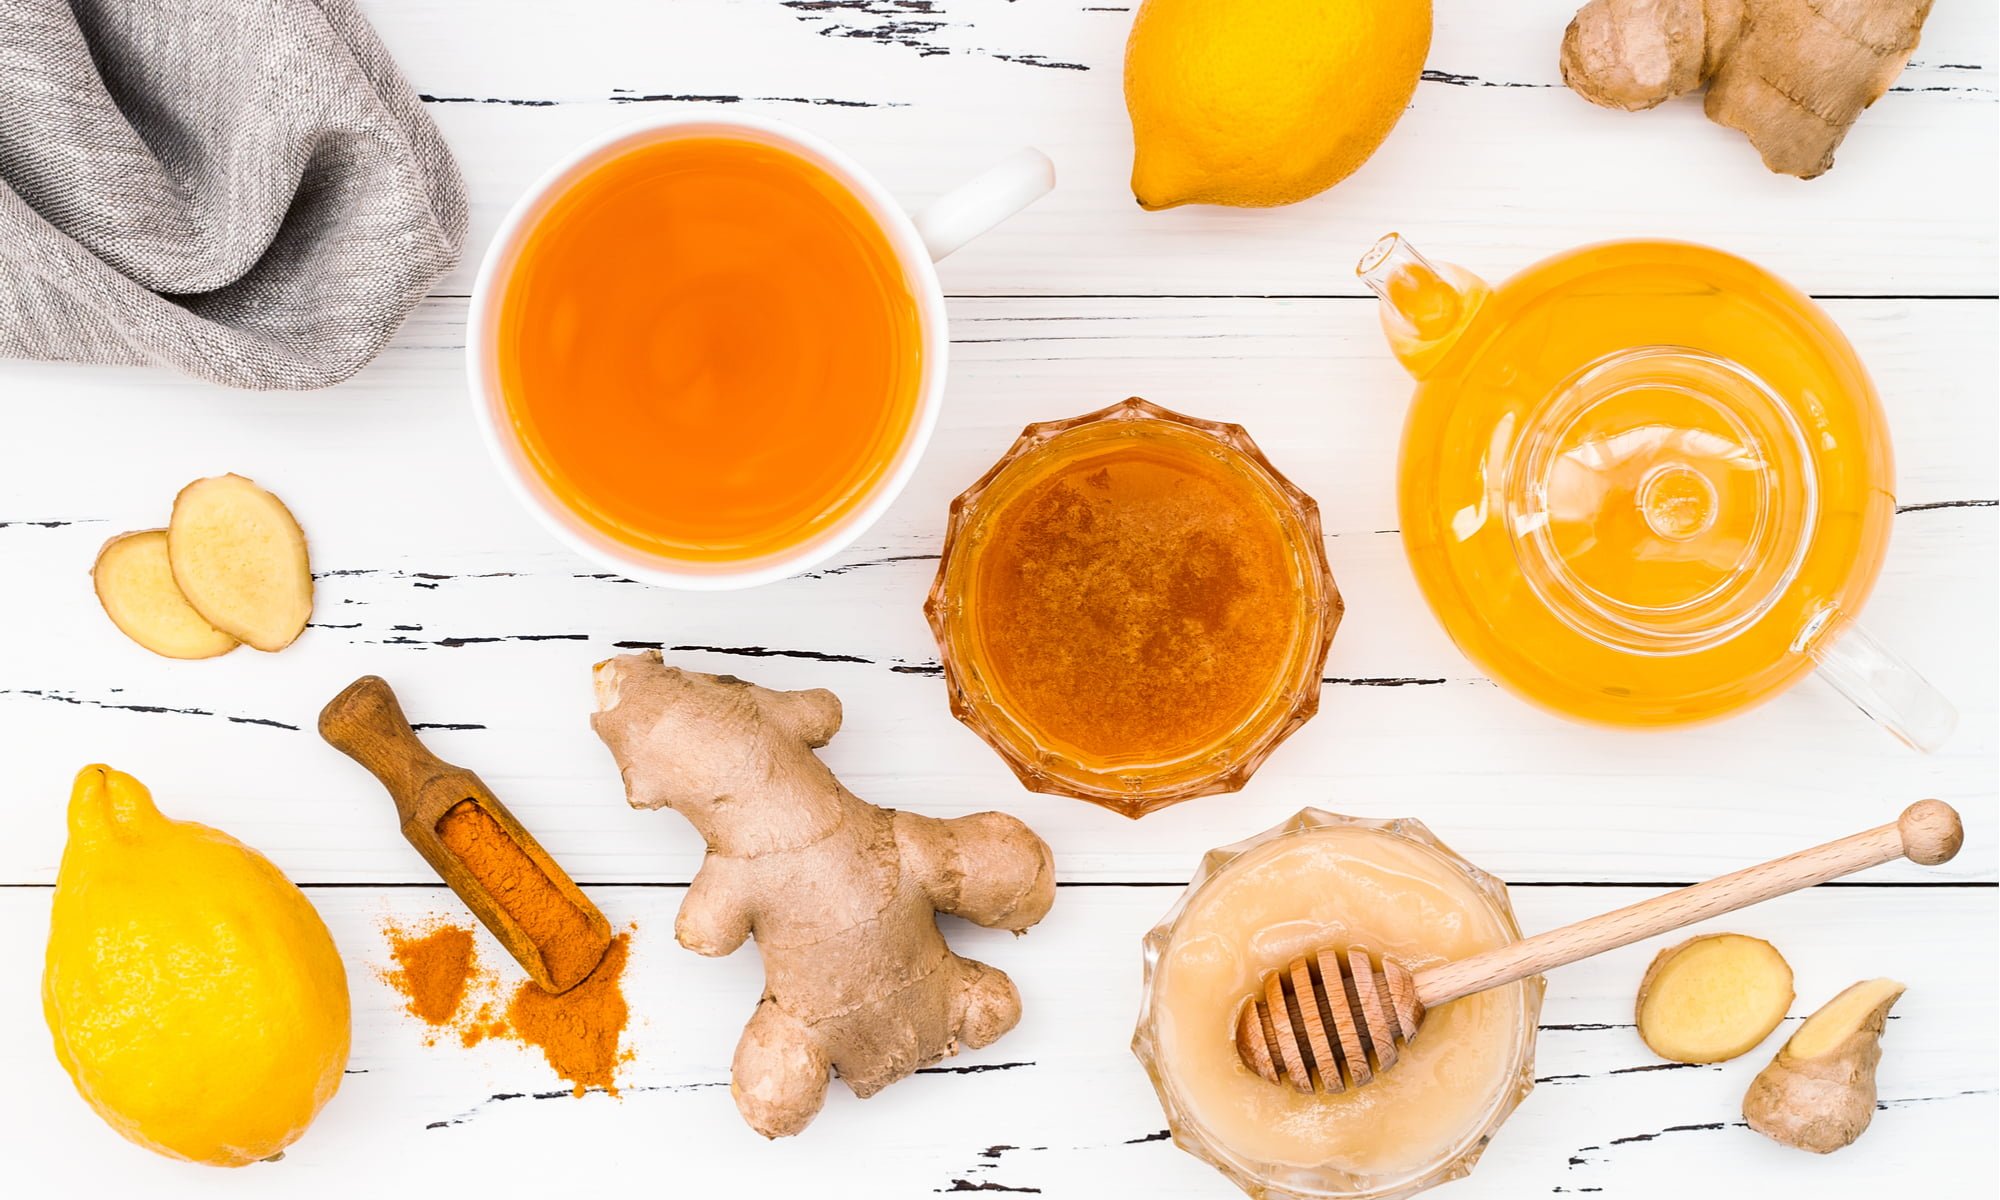 Kick The Cold With This Immune-Boosting Tonic